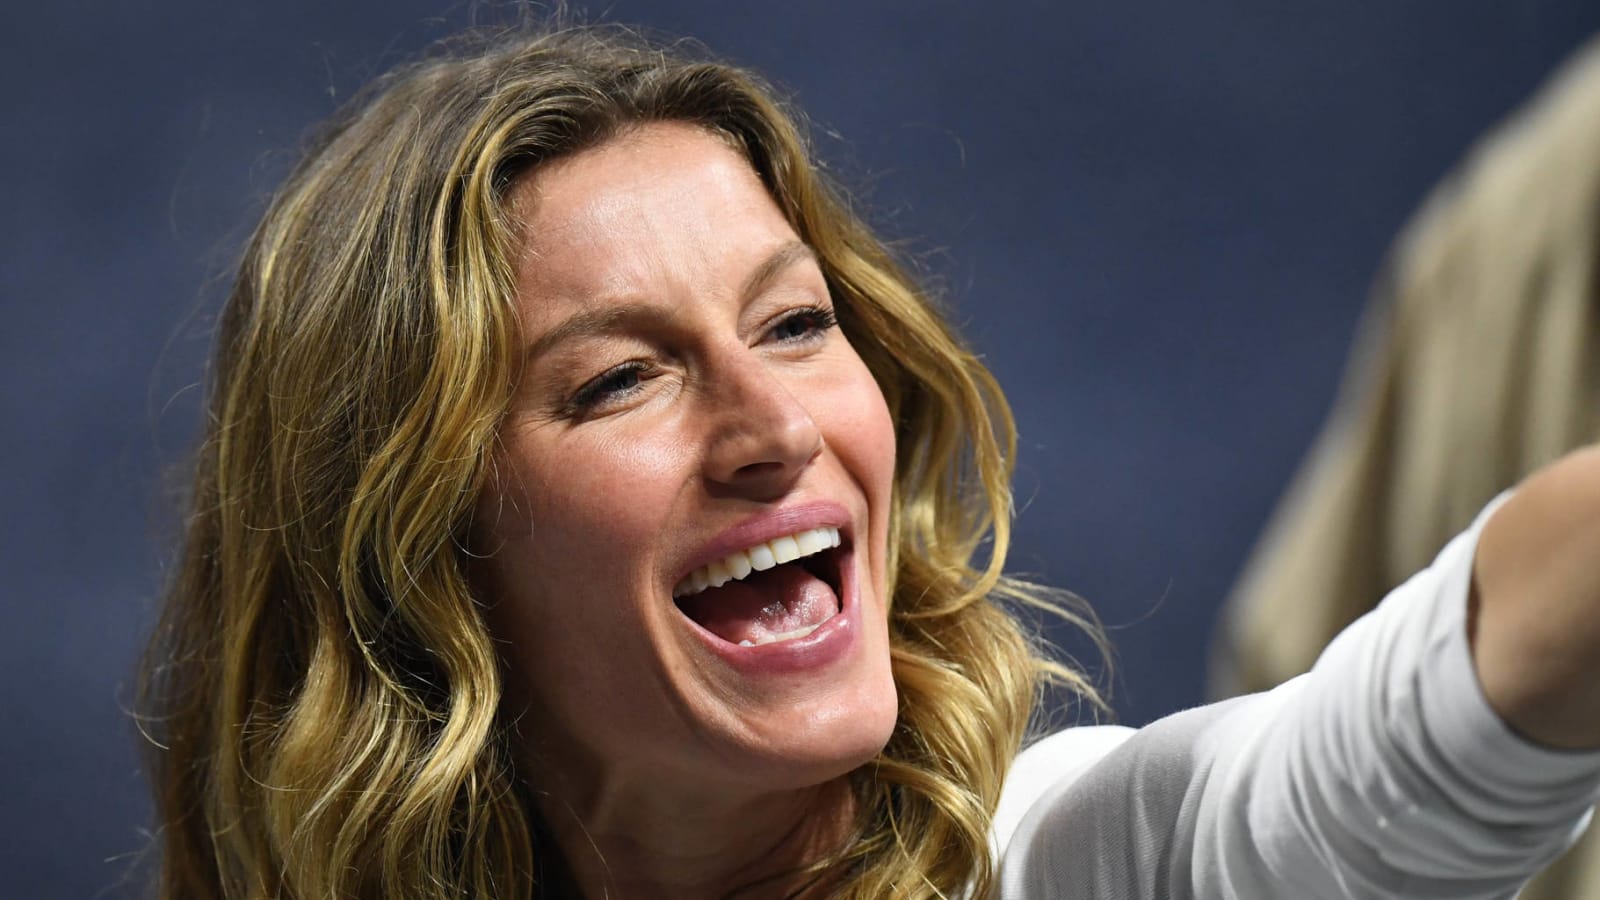 Tom Brady proves wife Gisele wrong about infamous quote